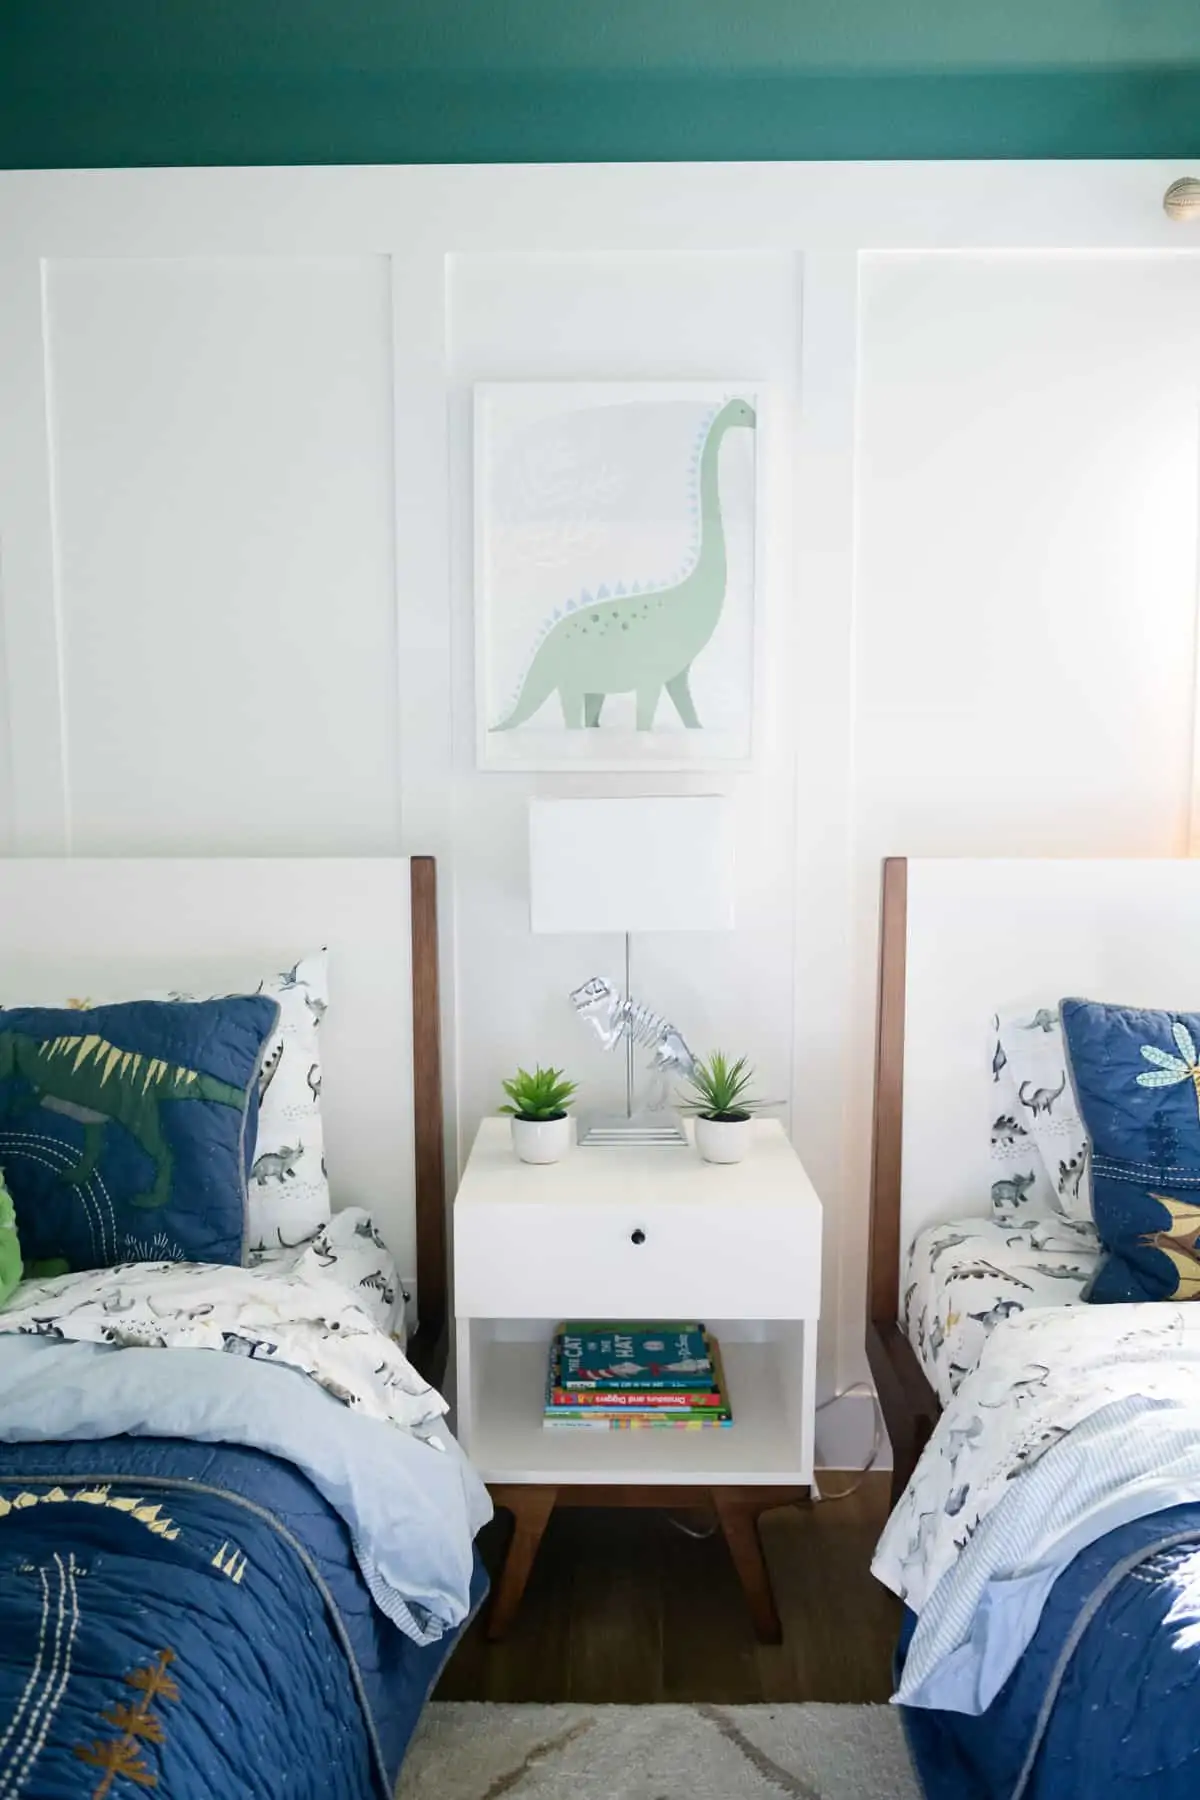 Bedroom Paint Colors by popular Dallas life and style blog, Glamorous Versatility: image of a boys' bedroom decorated with with twin beds, white headboards, dinosaur bedding, framed dinosaur art, and a white night stand with a lamp and faux plants resting on it. 